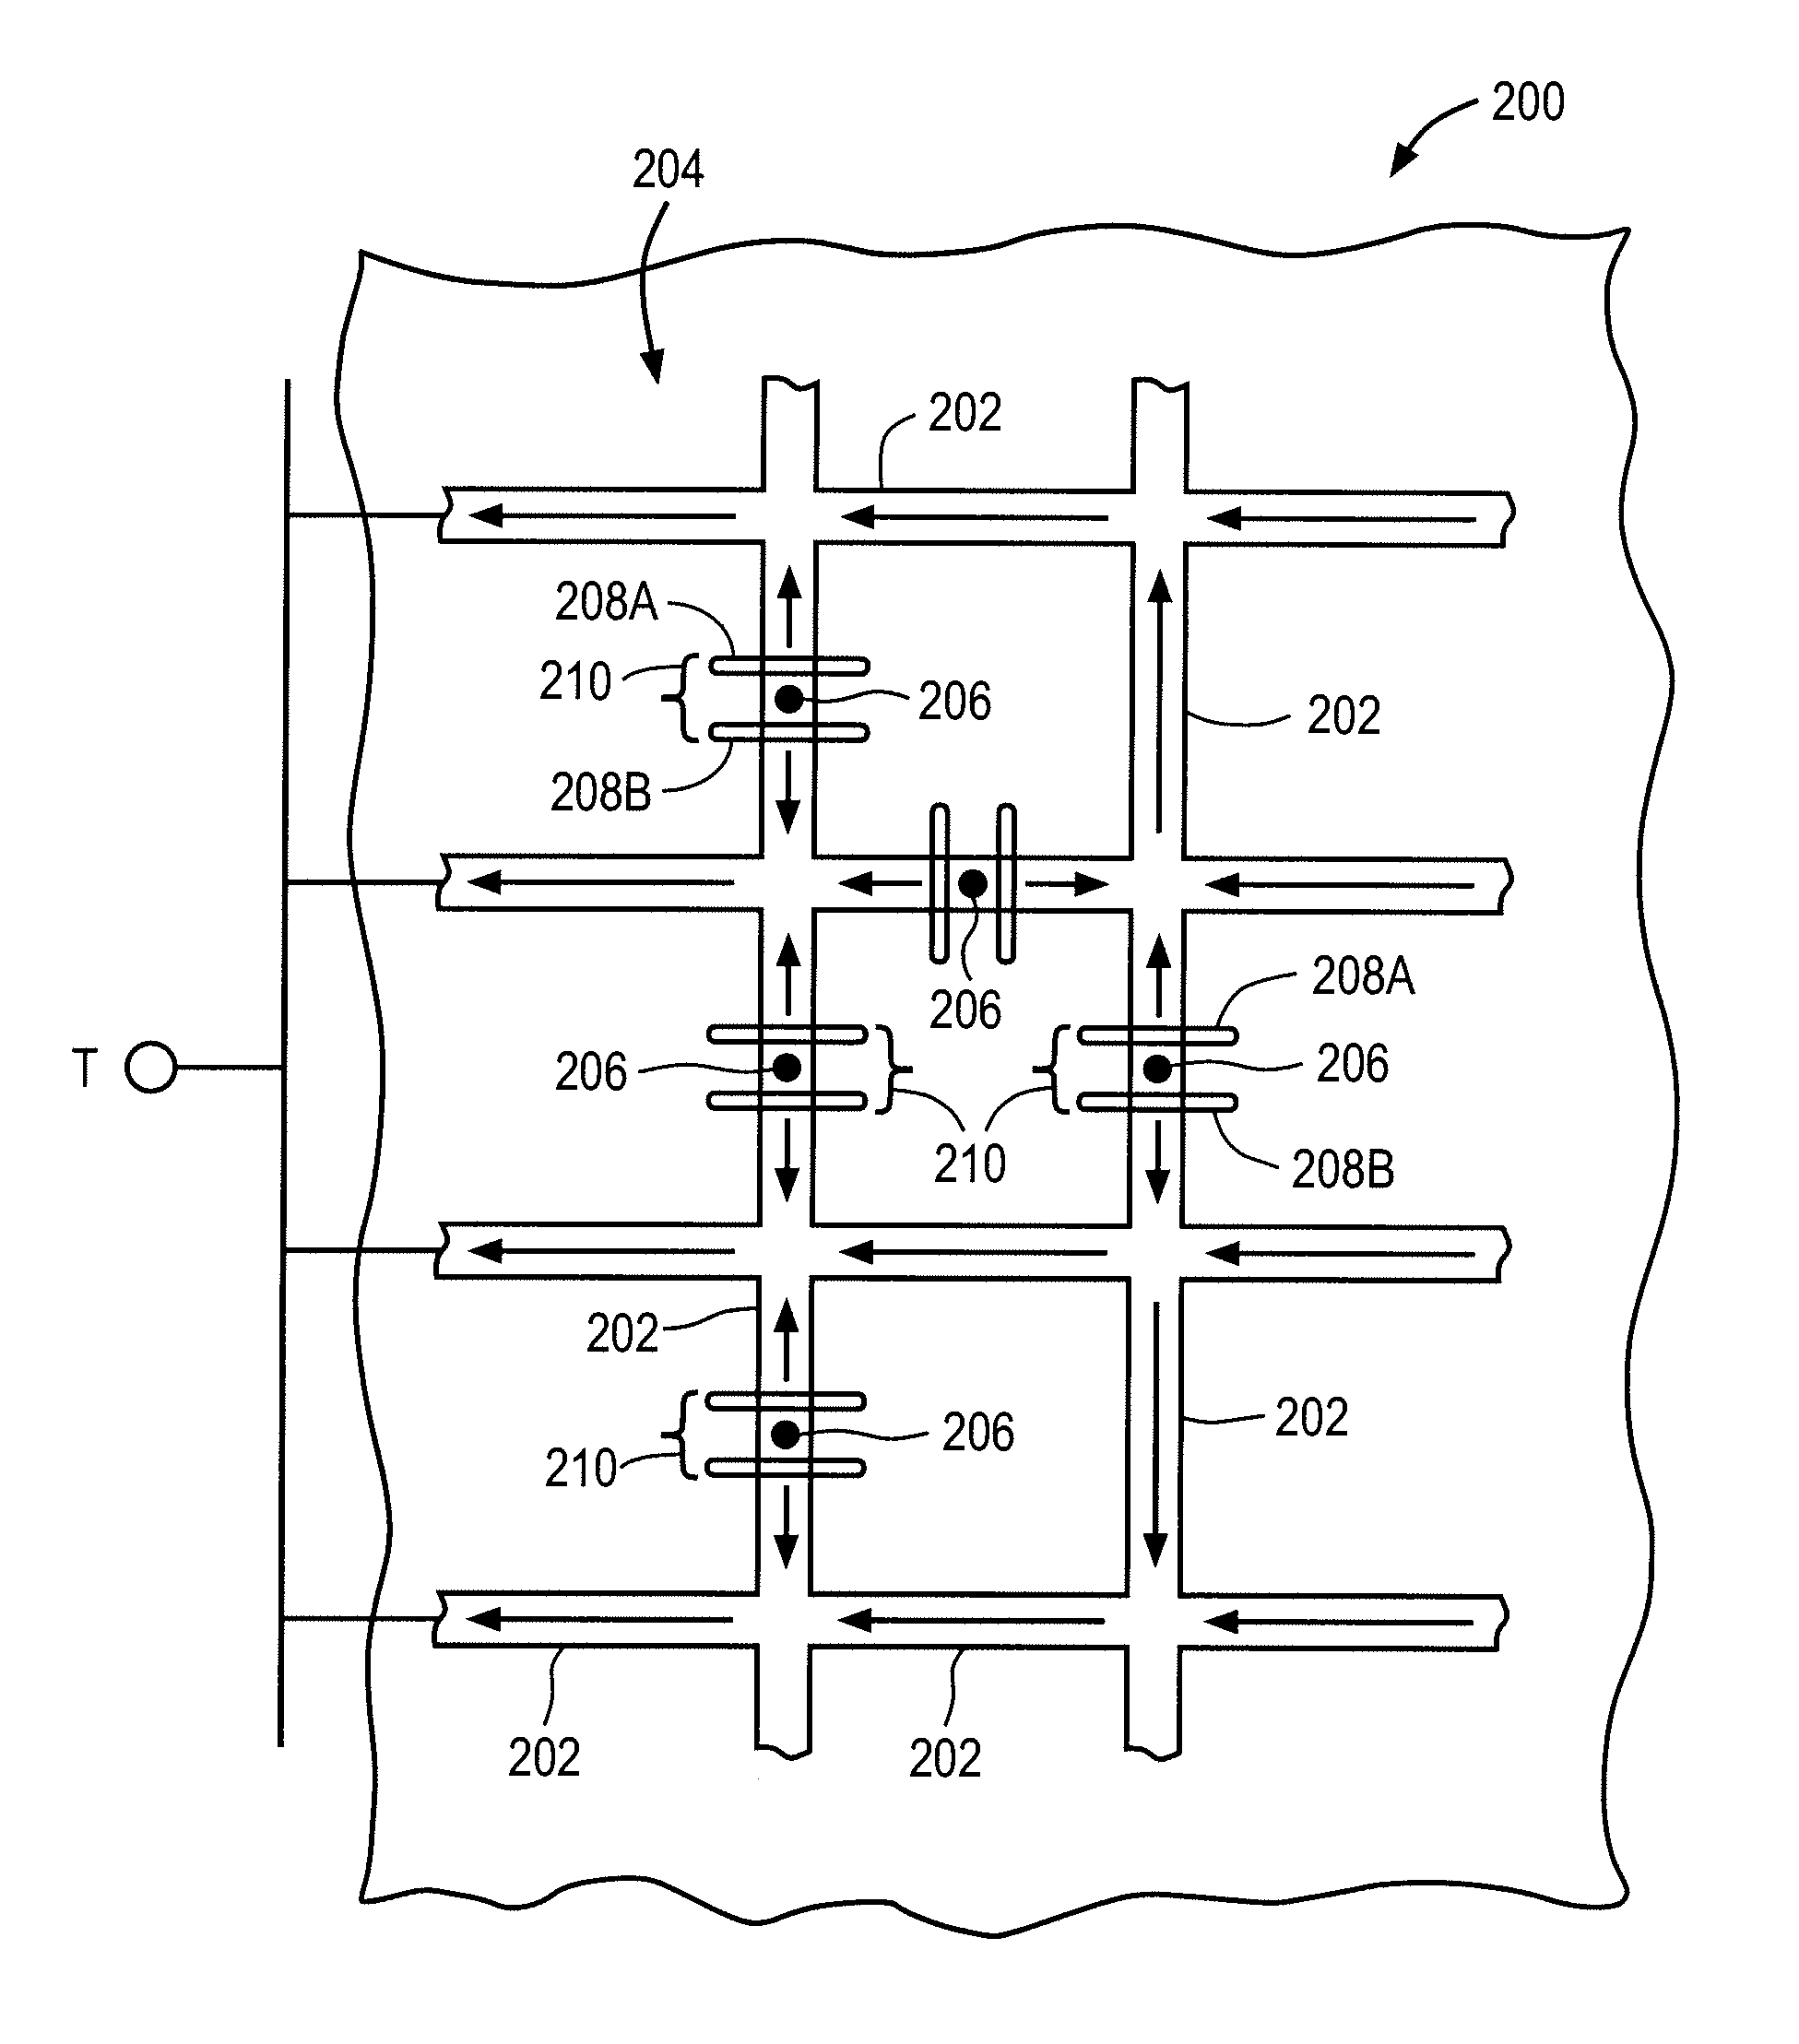 Method of detecting and passivating a defect in a solar cell